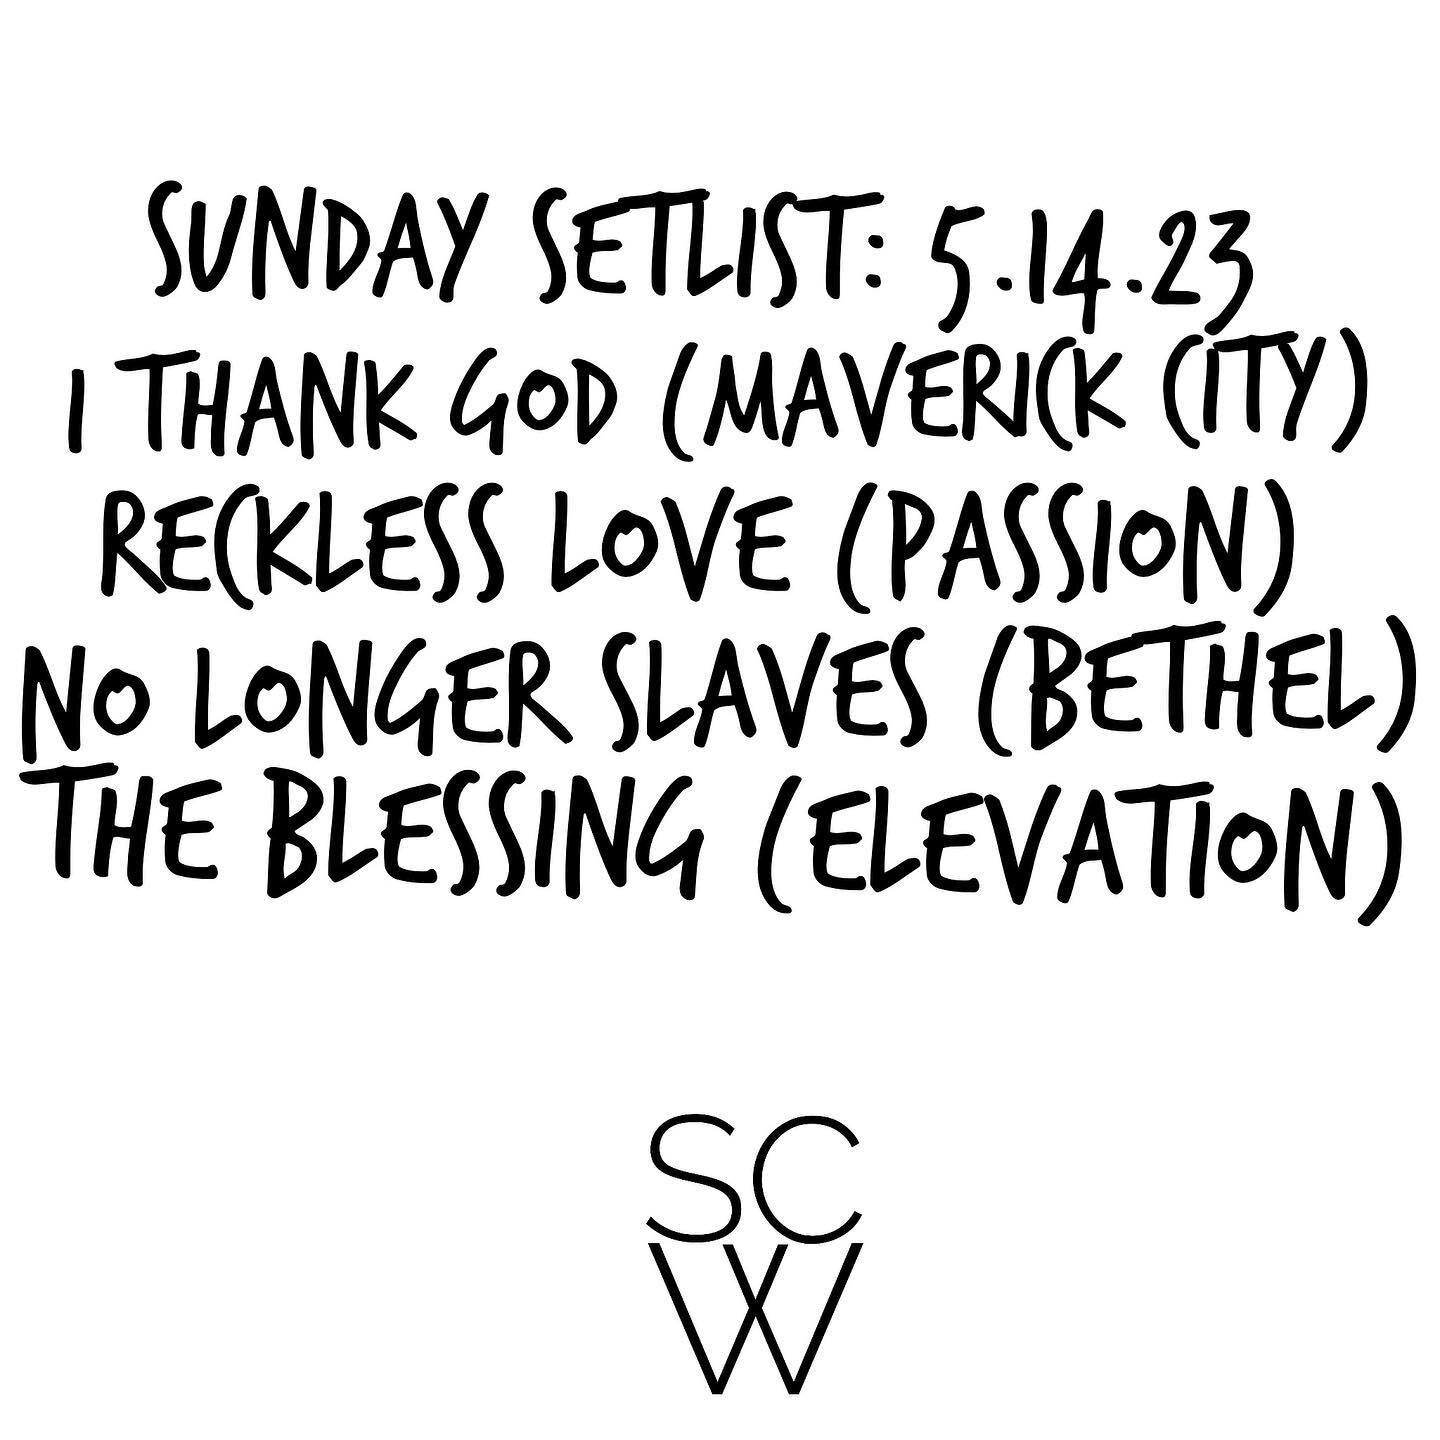 Sunday Setlist: 5.14.23

Thank you to everyone that worshipped with us at South yesterday&mdash;it was wonderful Mother&rsquo;s Day!

Here is a list of the songs that we did&mdash;we hope that they were a blessing, and we pray that they will continue